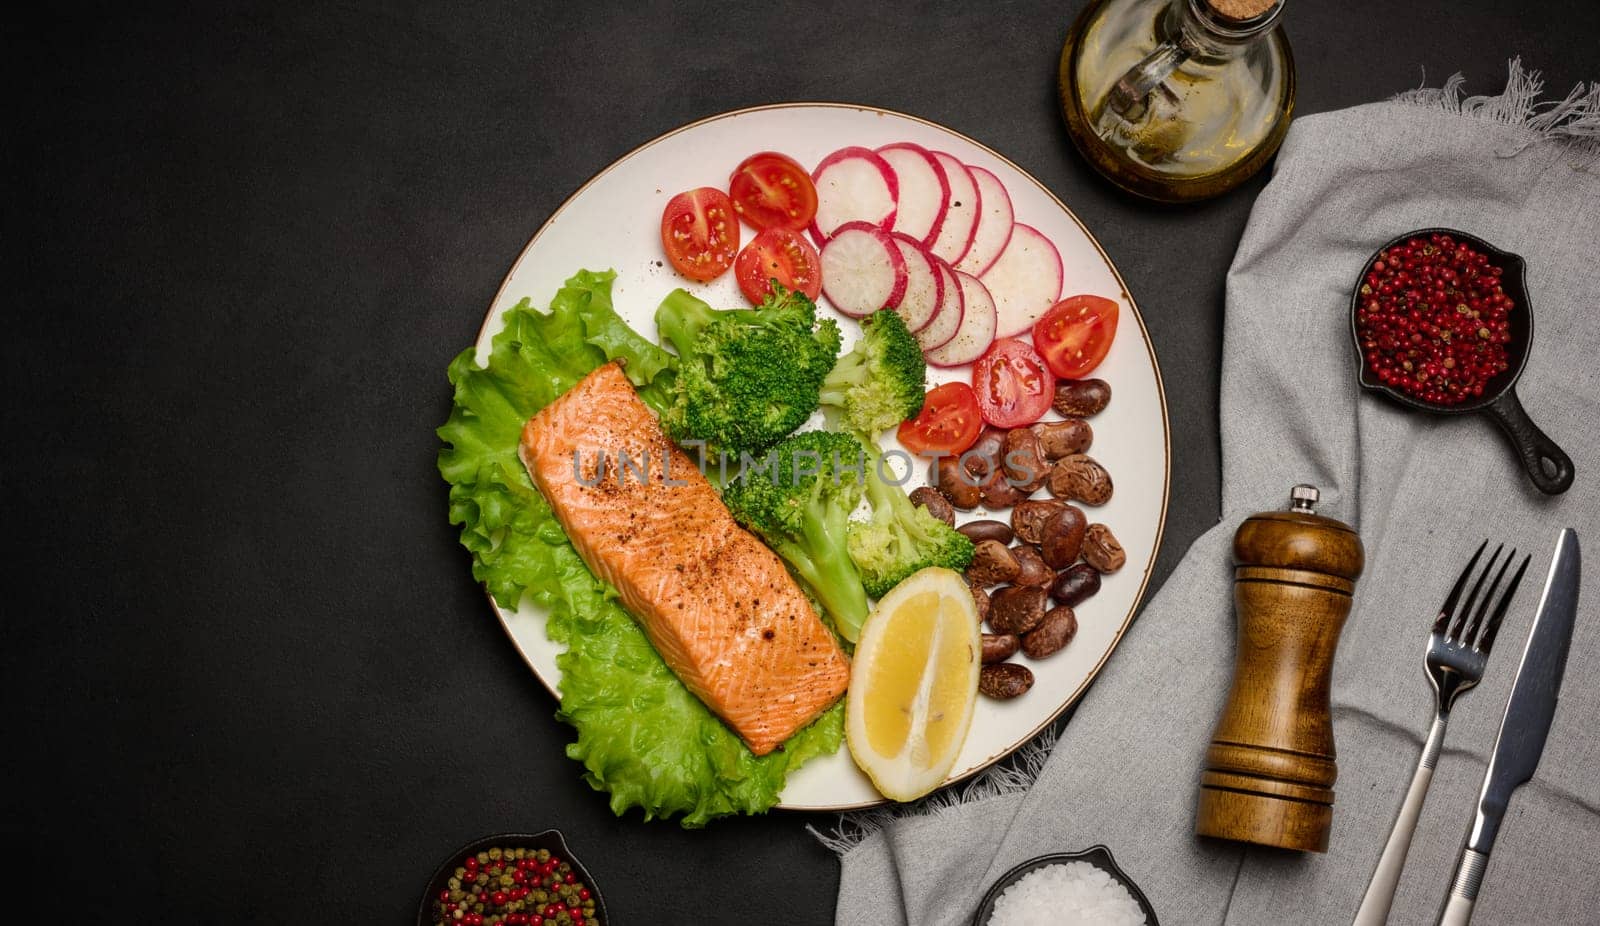 Healthy lunch with grilled salmon on green lettuce, next to vegetables, tomatoes, radishes, broccoli and a portion of beans. Black background